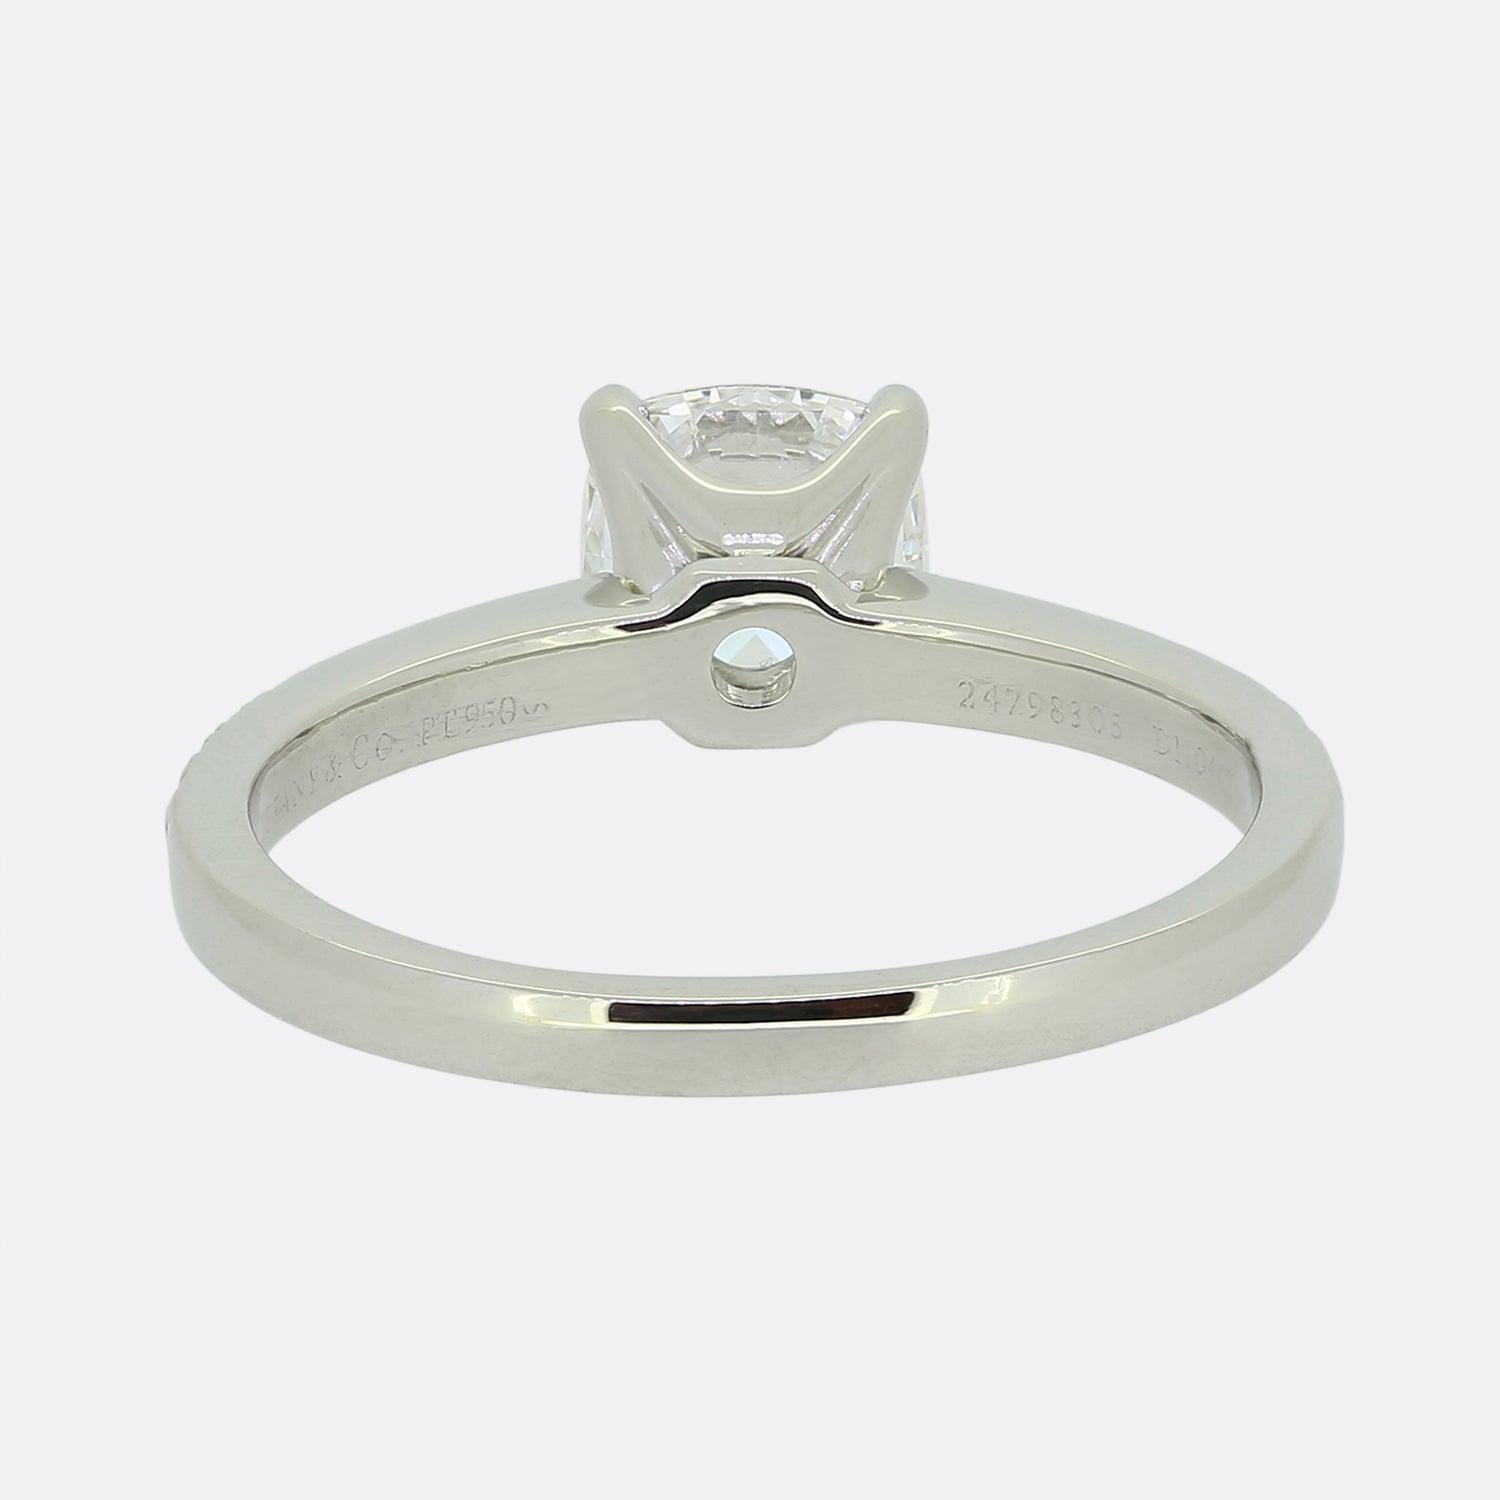 Tiffany & Co. 1.04 Carat Diamond Engagement Ring In Good Condition For Sale In London, GB